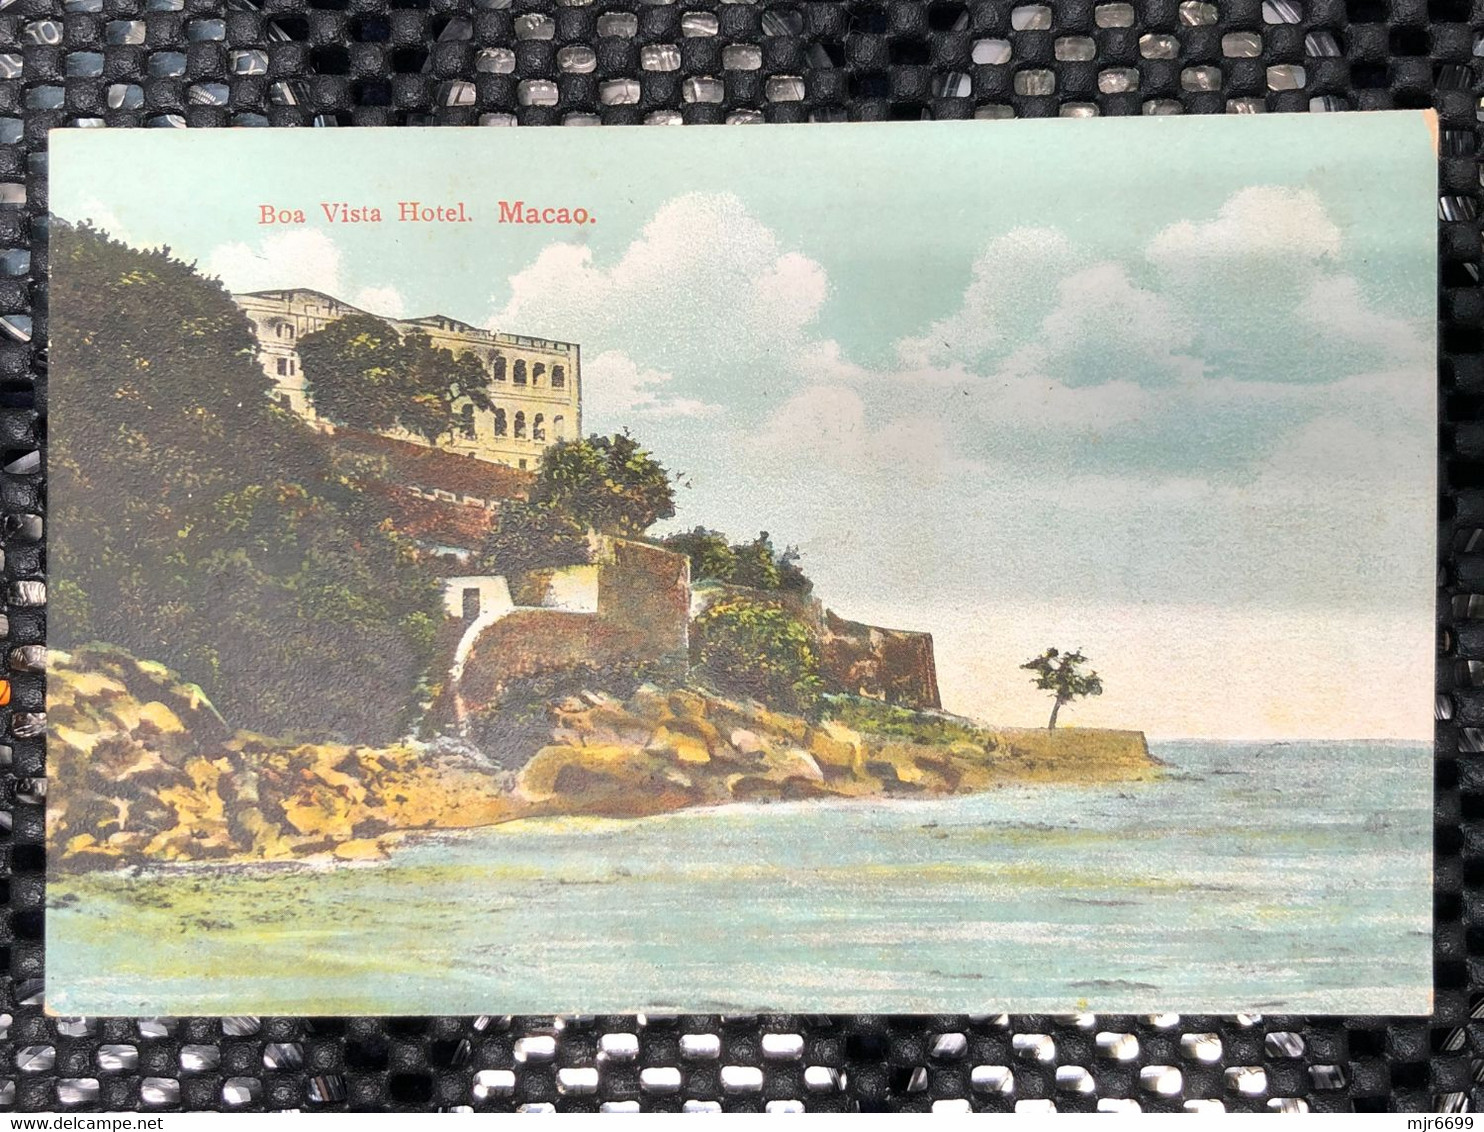 MACAU 19 CENTUARY  PICTURE POST CARD - VIEW OF BOA VISTA HOTEL IN COLOUR - TODAY PORTUGAL EMBASSY RESIDENCE - Macau